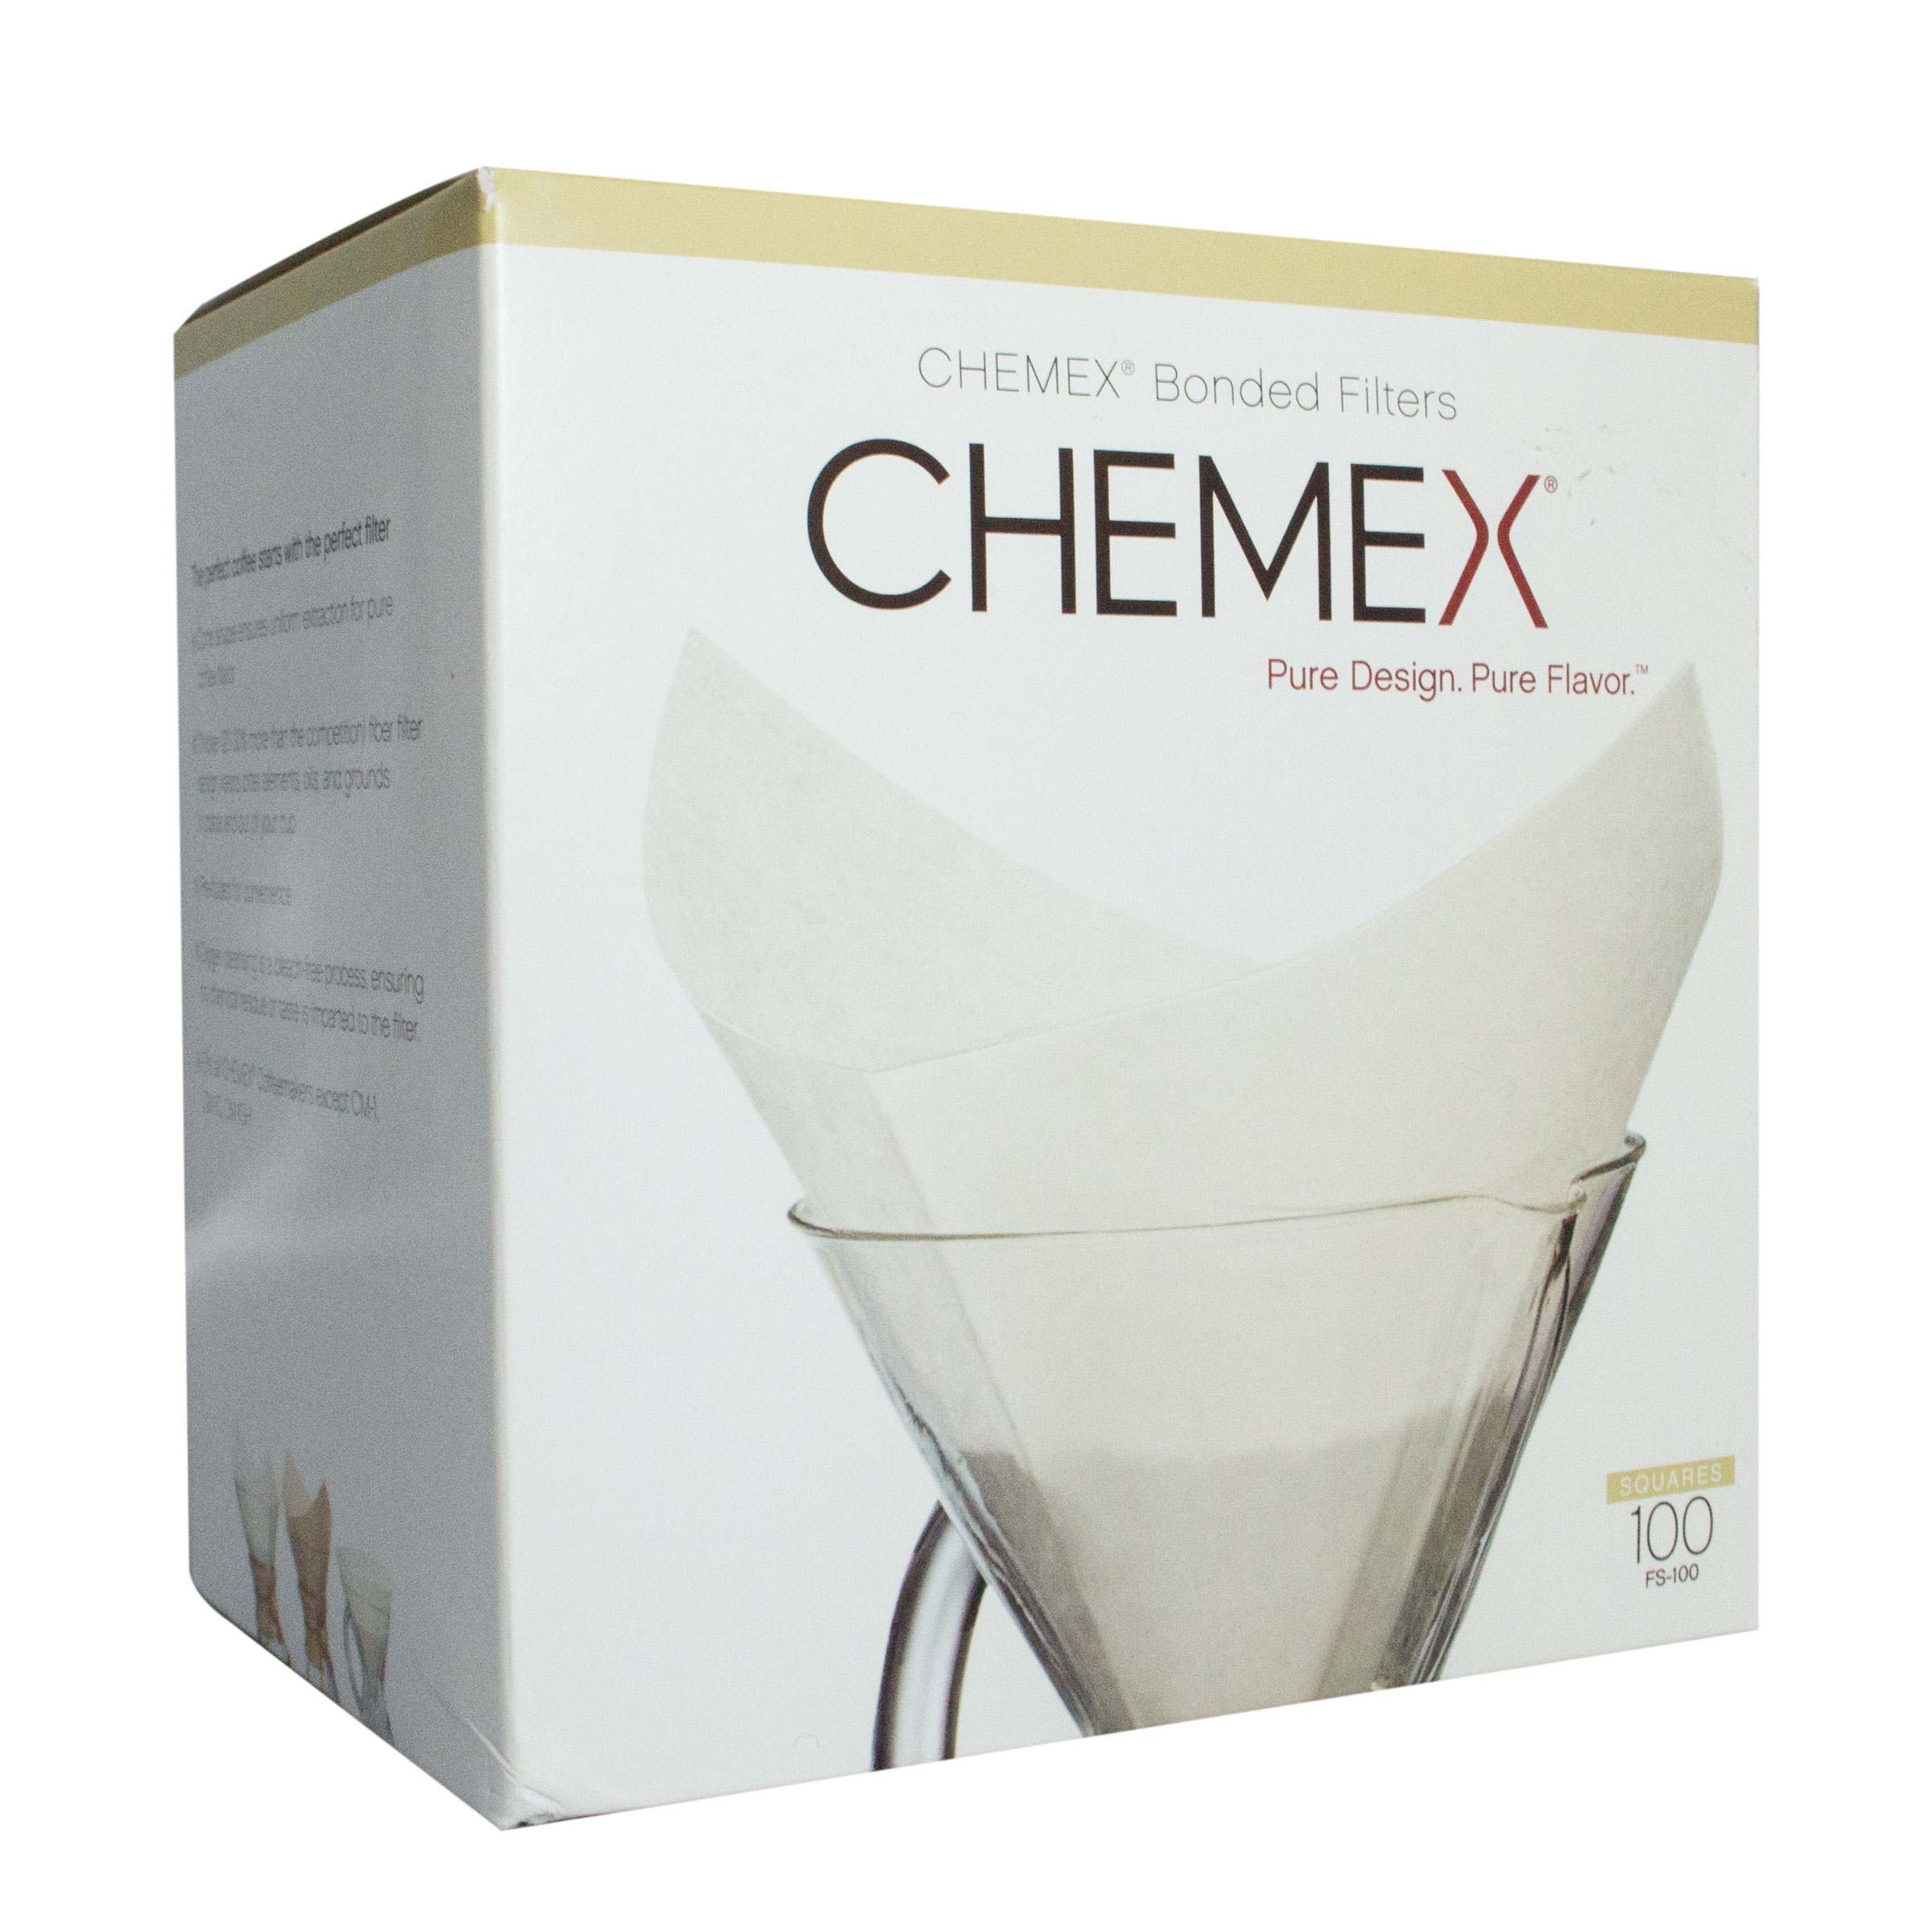 Picture Chemex Bonded Square Filters (100 ct.)